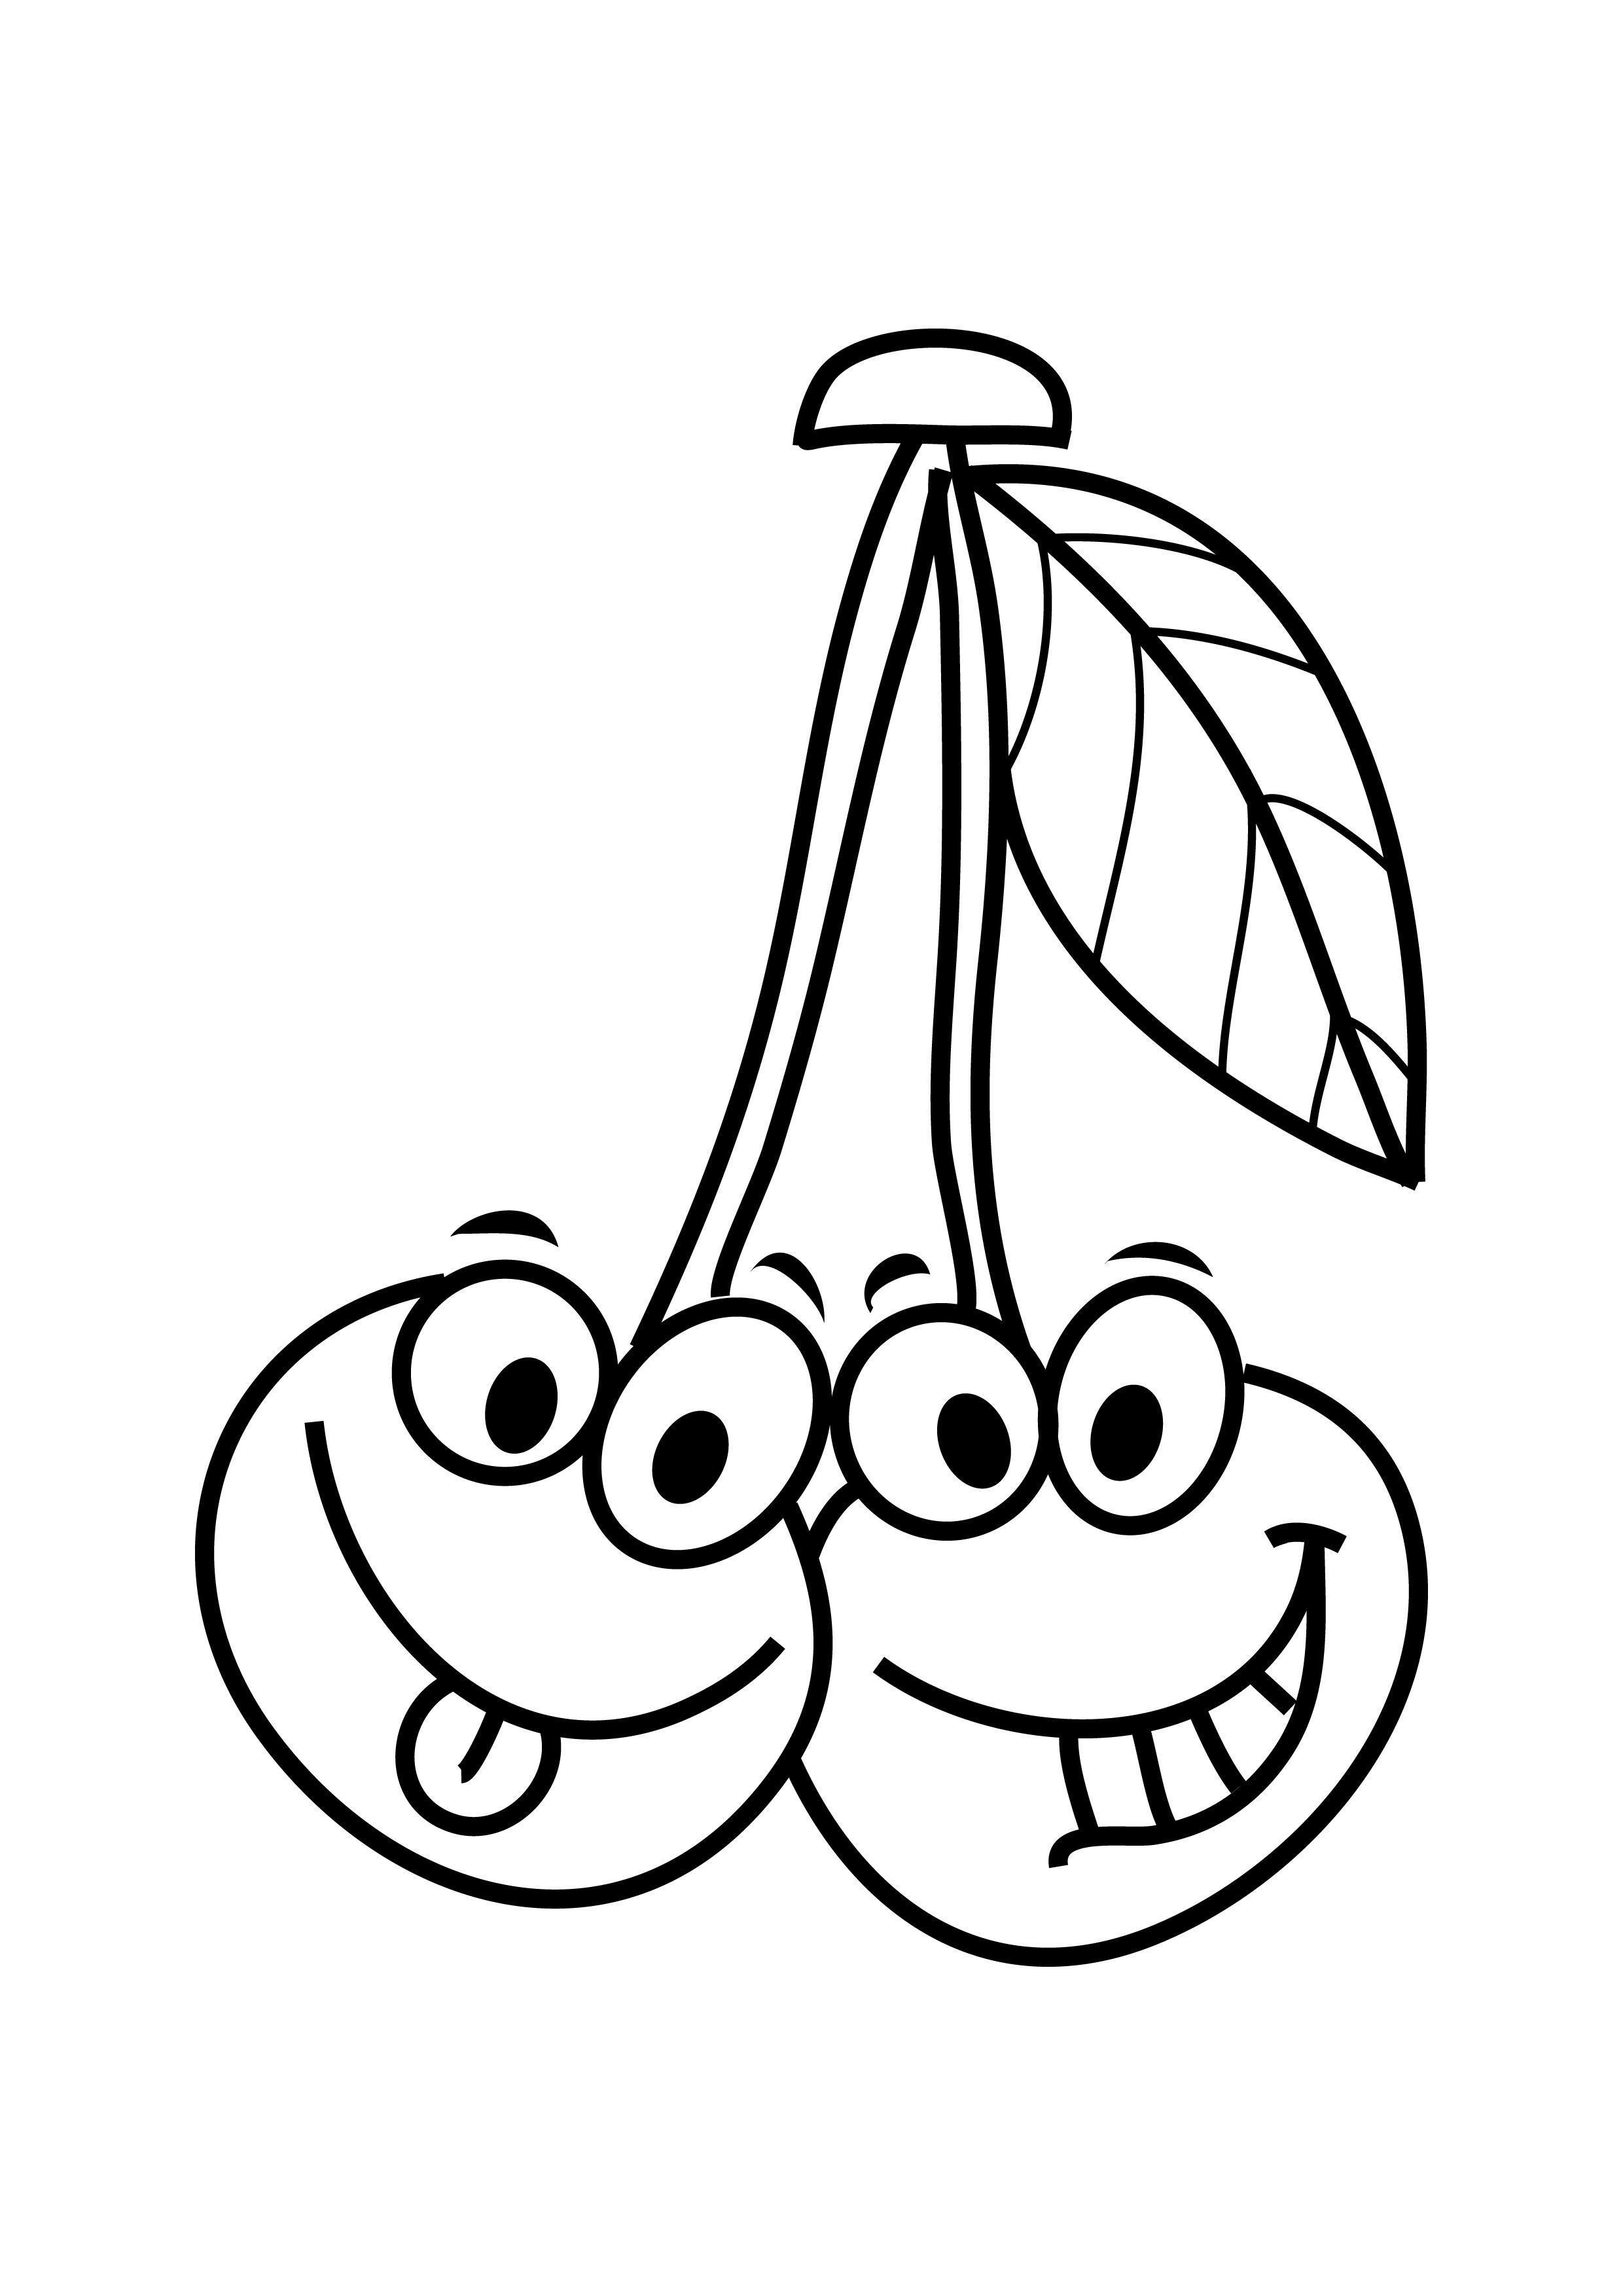 Smart fruits and vegetables coloring pages | Crafts and Worksheets for